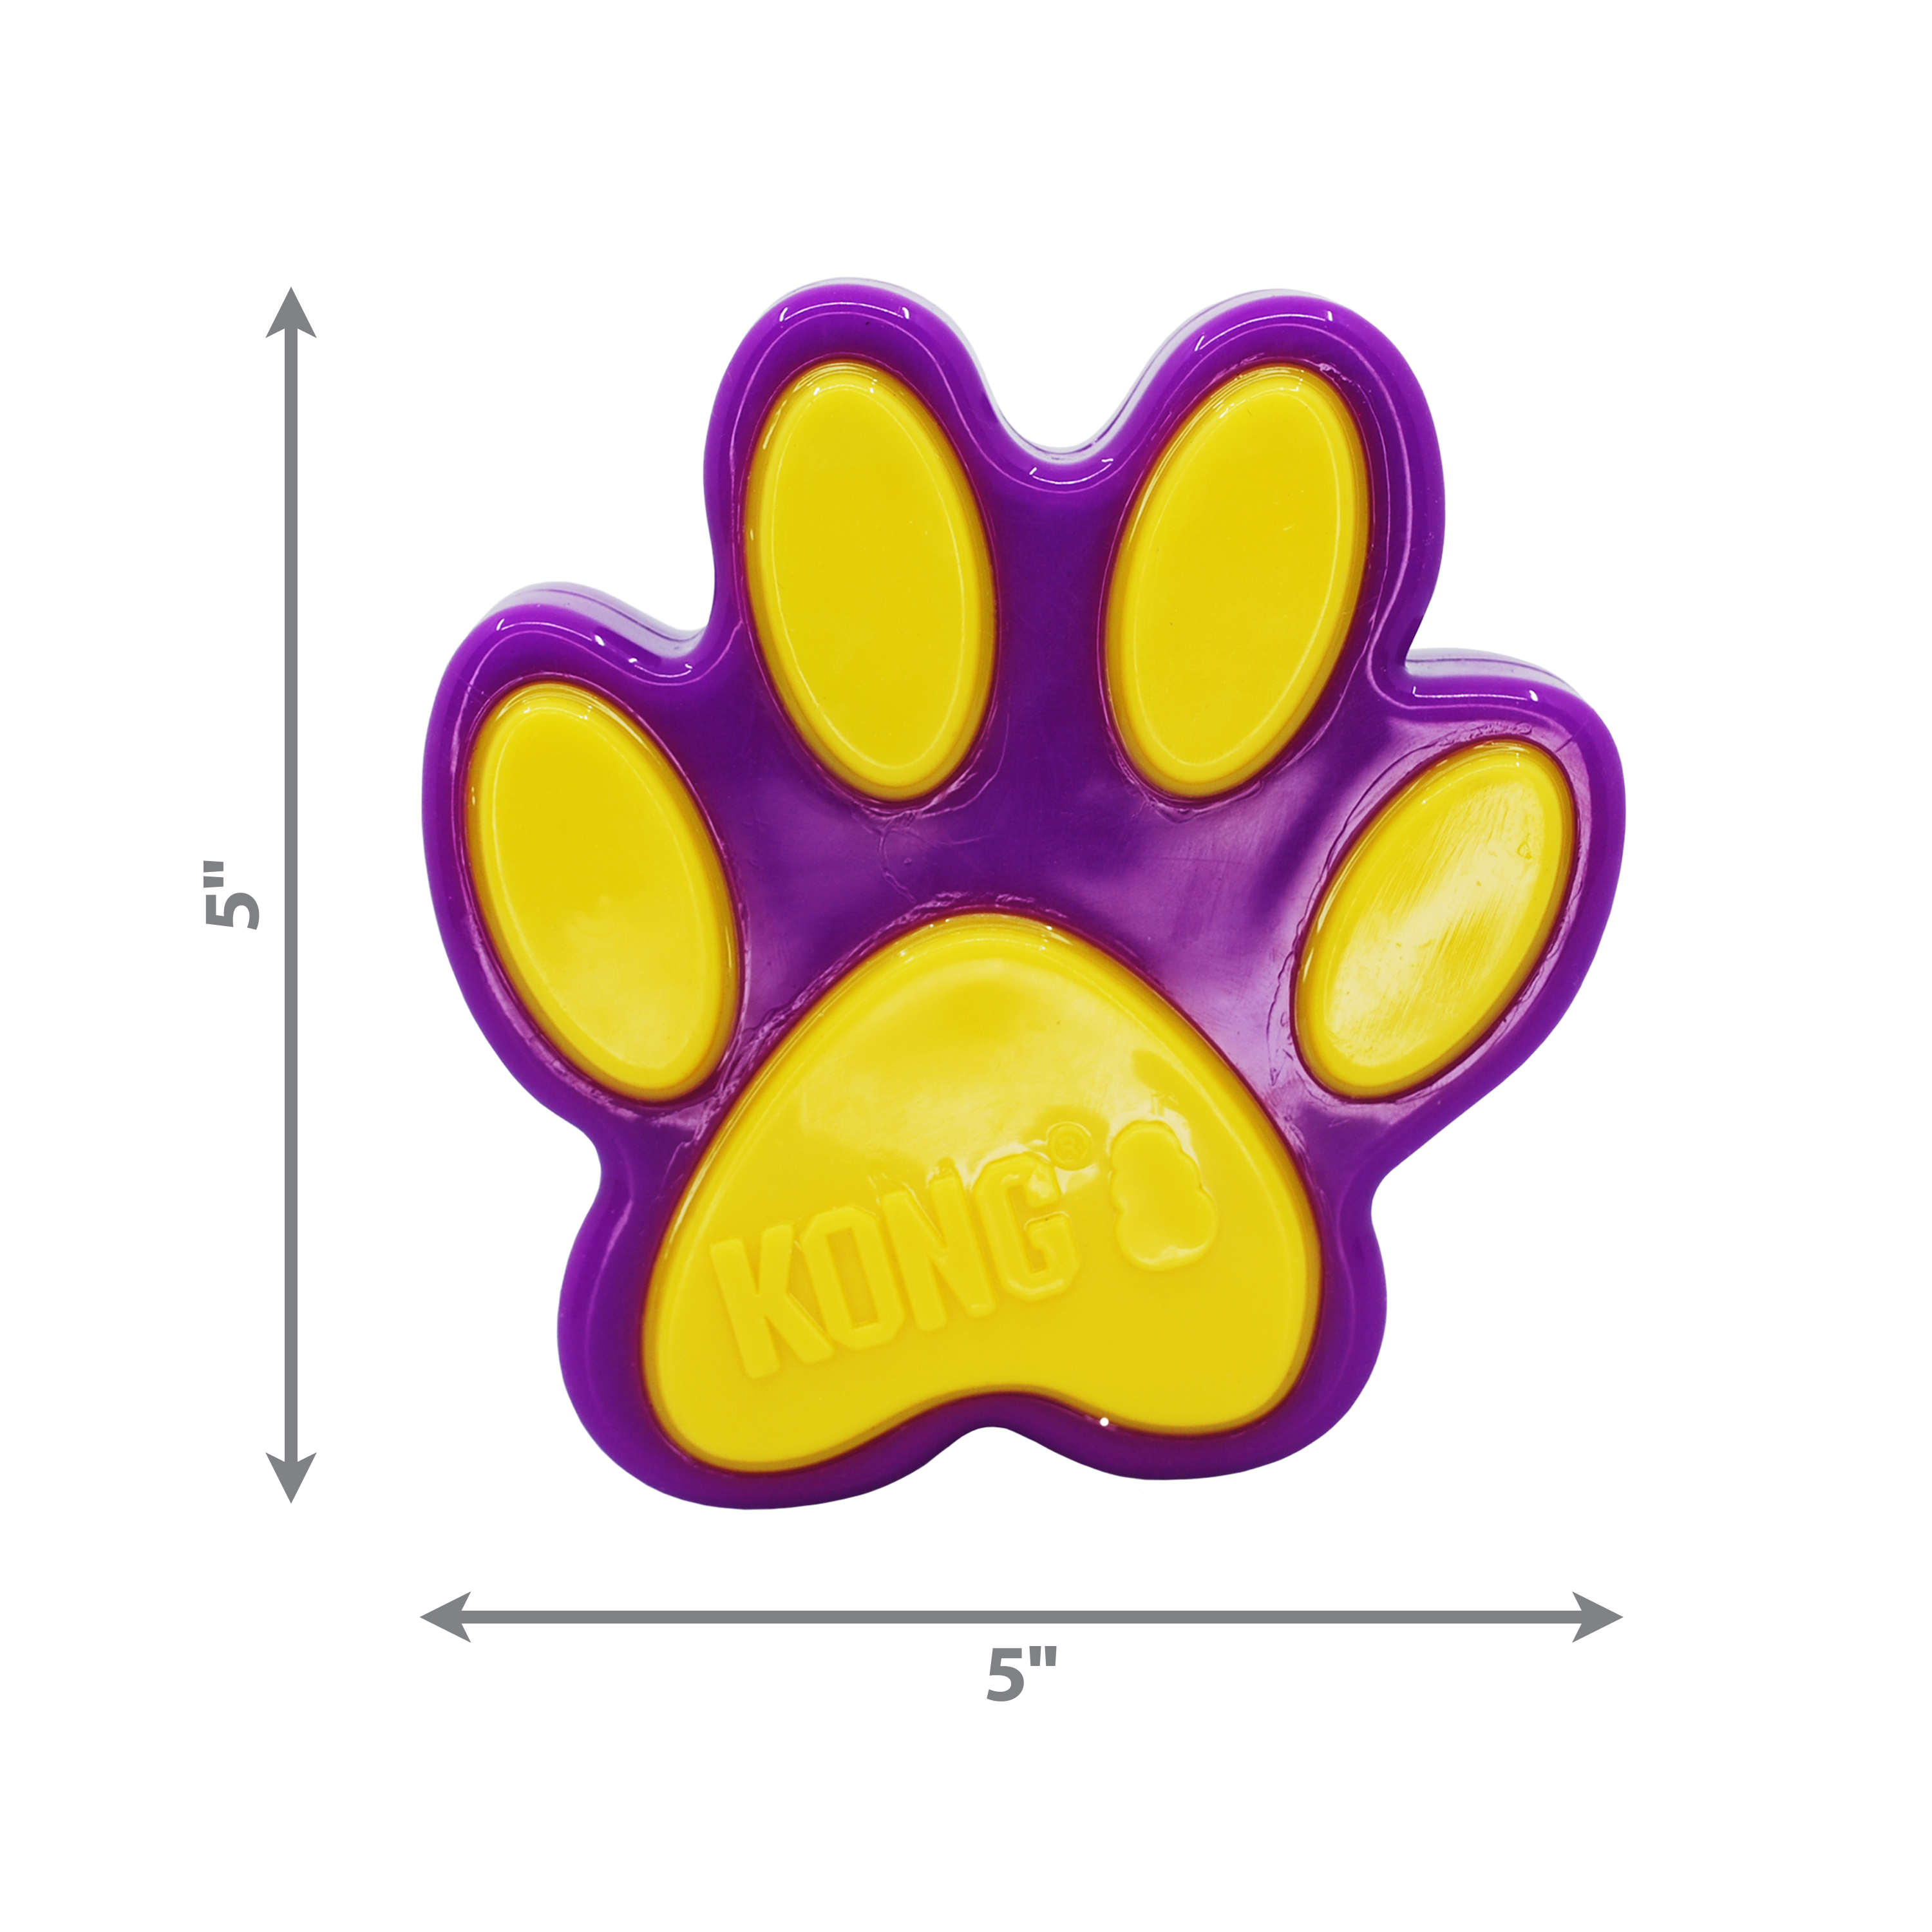 Eon Paw dimoffpack product image